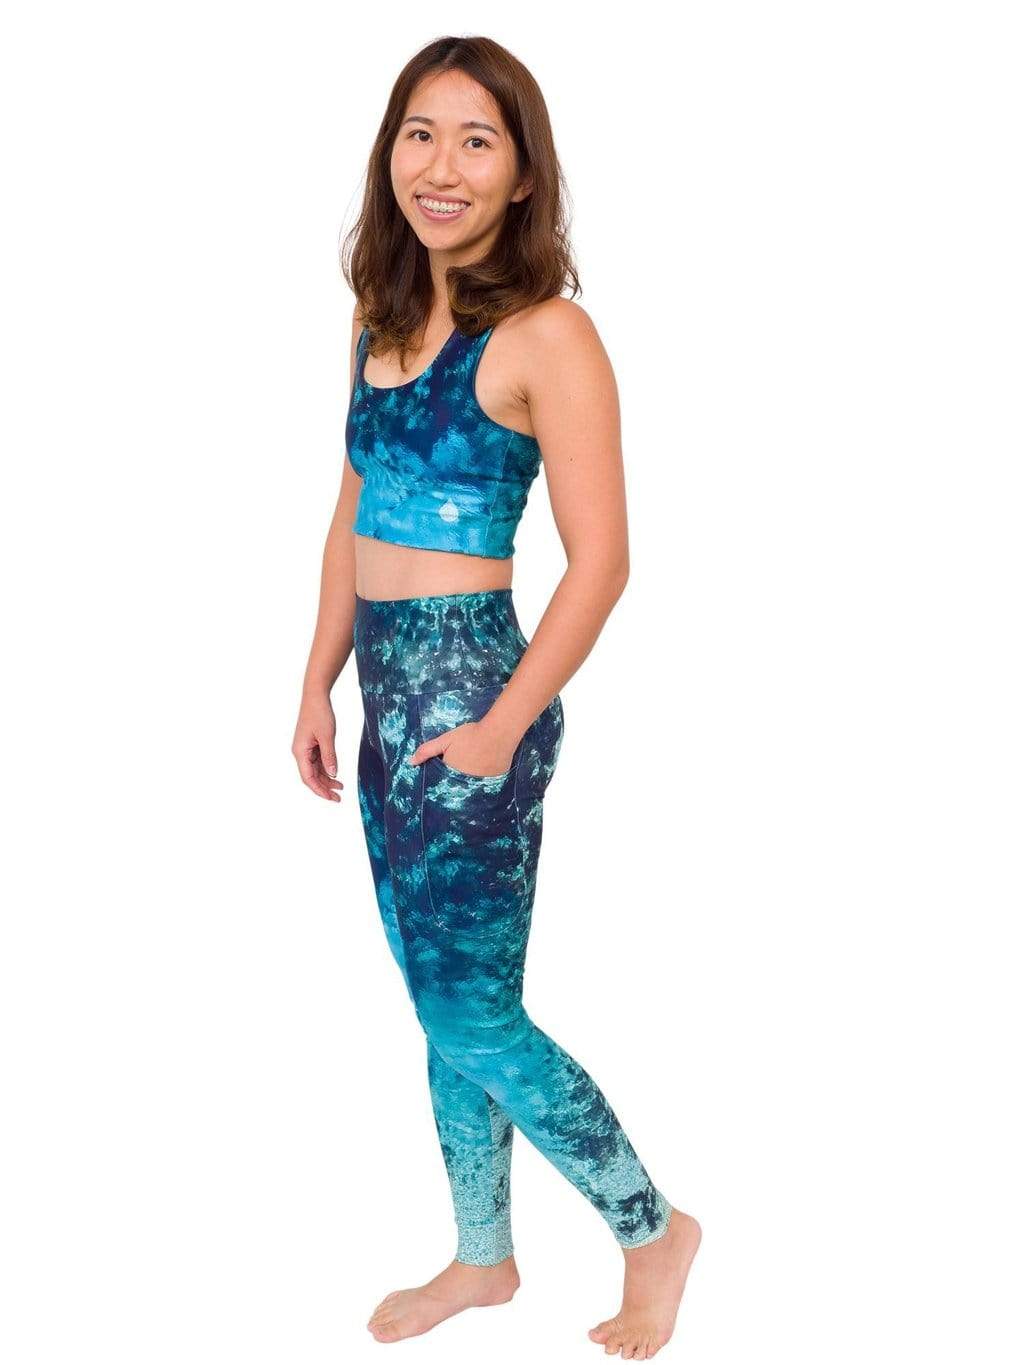 Model: Laura is a hurricane researcher and avid scuba diver. She is 5&#39;3&quot;, 120lbs, 34B and is wearing a S top and leggings.